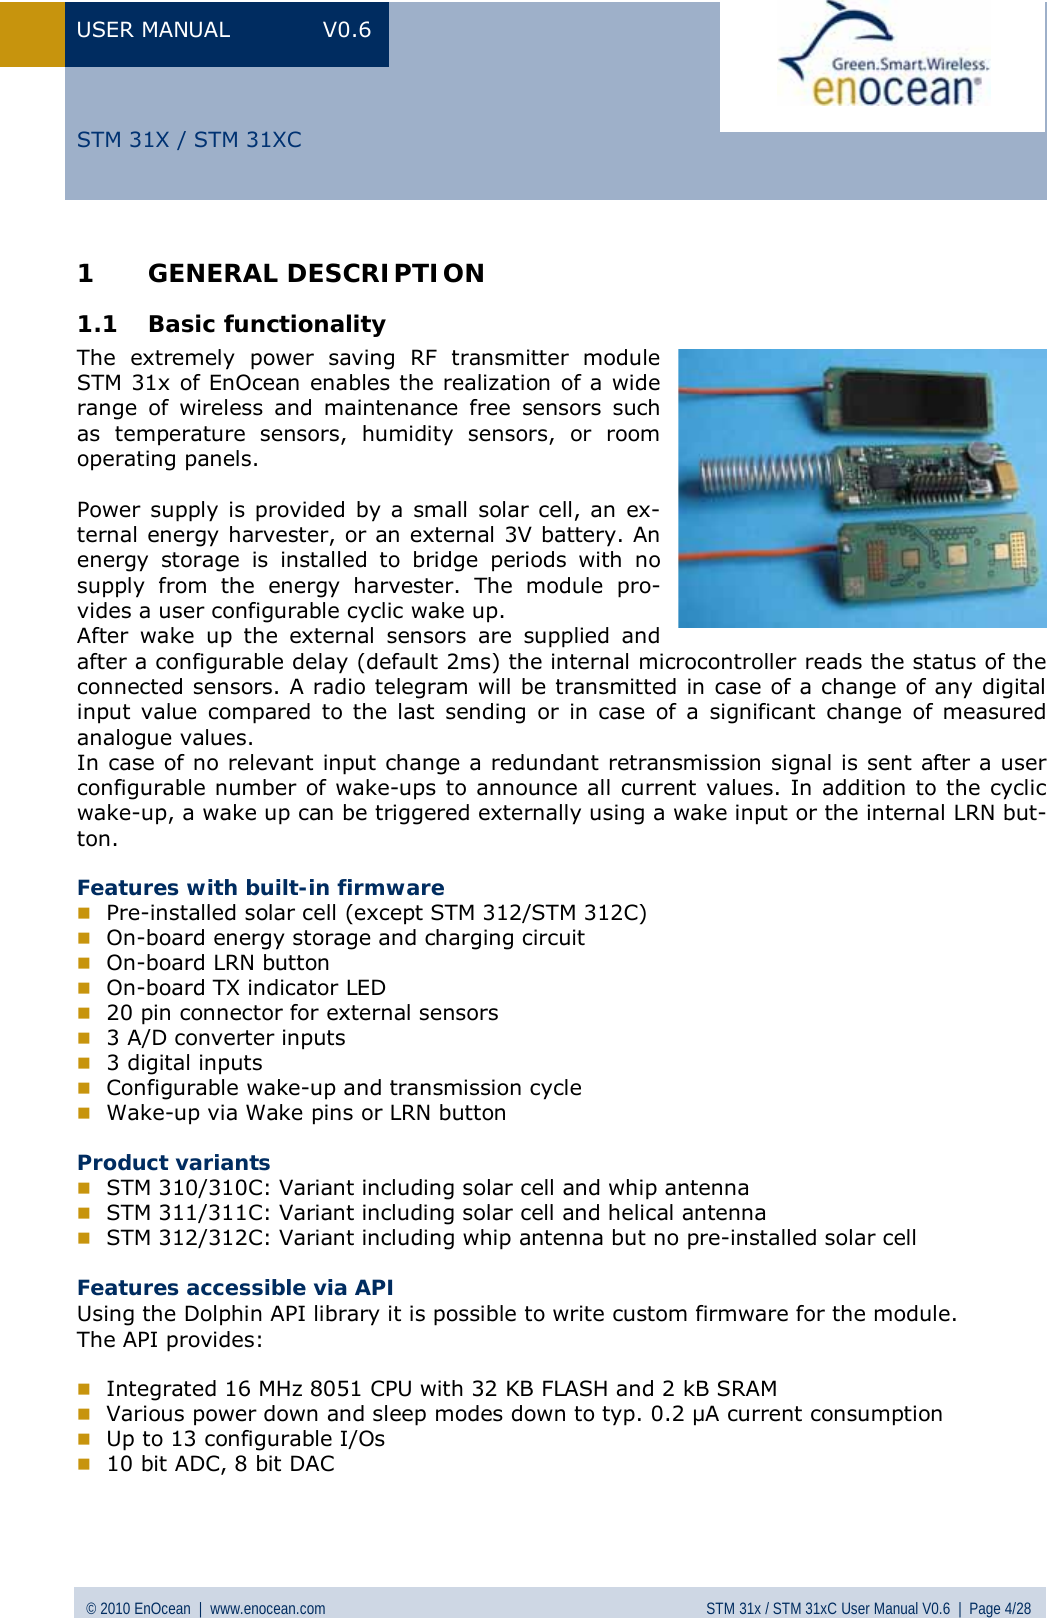 USER MANUAL V0.6 © 2010 EnOcean  |  www.enocean.com STM 31x / STM 31xC User Manual V0.6  |  Page 4/28  STM 31X / STM 31XC1 GENERAL DESCRIPTION 1.1 Basic functionality The extremely power saving RF transmitter module STM 31x of EnOcean enables the realization of a wide range of wireless and maintenance free sensors such as temperature sensors, humidity sensors, or room operating panels.  Power supply is provided by a small solar cell, an ex-ternal energy harvester, or an external 3V battery. An energy storage is installed to bridge periods with no supply from the energy harvester. The module pro-vides a user configurable cyclic wake up.  After wake up the external sensors are supplied and after a configurable delay (default 2ms) the internal microcontroller reads the status of the connected sensors. A radio telegram will be transmitted in case of a change of any digital input value compared to the last sending or in case of a significant change of measured analogue values.  In case of no relevant input change a redundant retransmission signal is sent after a user configurable number of wake-ups to announce all current values. In addition to the cyclic wake-up, a wake up can be triggered externally using a wake input or the internal LRN but-ton.  Features with built-in firmware  Pre-installed solar cell (except STM 312/STM 312C)  On-board energy storage and charging circuit  On-board LRN button   On-board TX indicator LED  20 pin connector for external sensors  3 A/D converter inputs  3 digital inputs  Configurable wake-up and transmission cycle  Wake-up via Wake pins or LRN button  Product variants  STM 310/310C: Variant including solar cell and whip antenna  STM 311/311C: Variant including solar cell and helical antenna  STM 312/312C: Variant including whip antenna but no pre-installed solar cell  Features accessible via API Using the Dolphin API library it is possible to write custom firmware for the module. The API provides:   Integrated 16 MHz 8051 CPU with 32 KB FLASH and 2 kB SRAM  Various power down and sleep modes down to typ. 0.2 µA current consumption  Up to 13 configurable I/Os  10 bit ADC, 8 bit DAC   